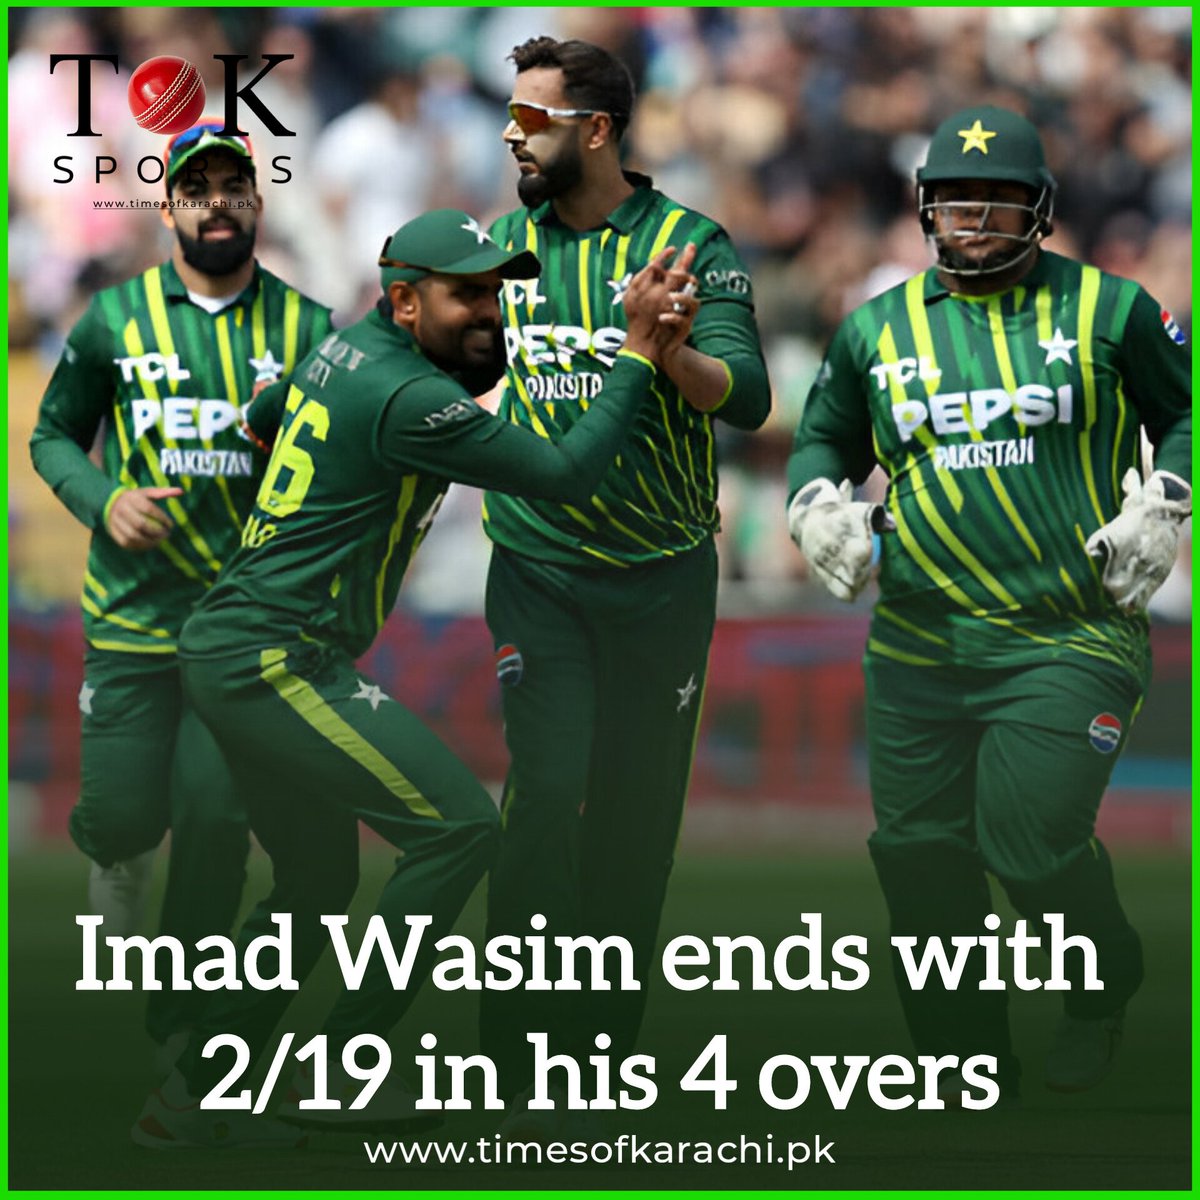 Imad Wasim delivers an outstanding spell, conceding just 19 runs and taking 2 wickets in his 4 overs. #TOKSports #ImadWasim #PAKvENG